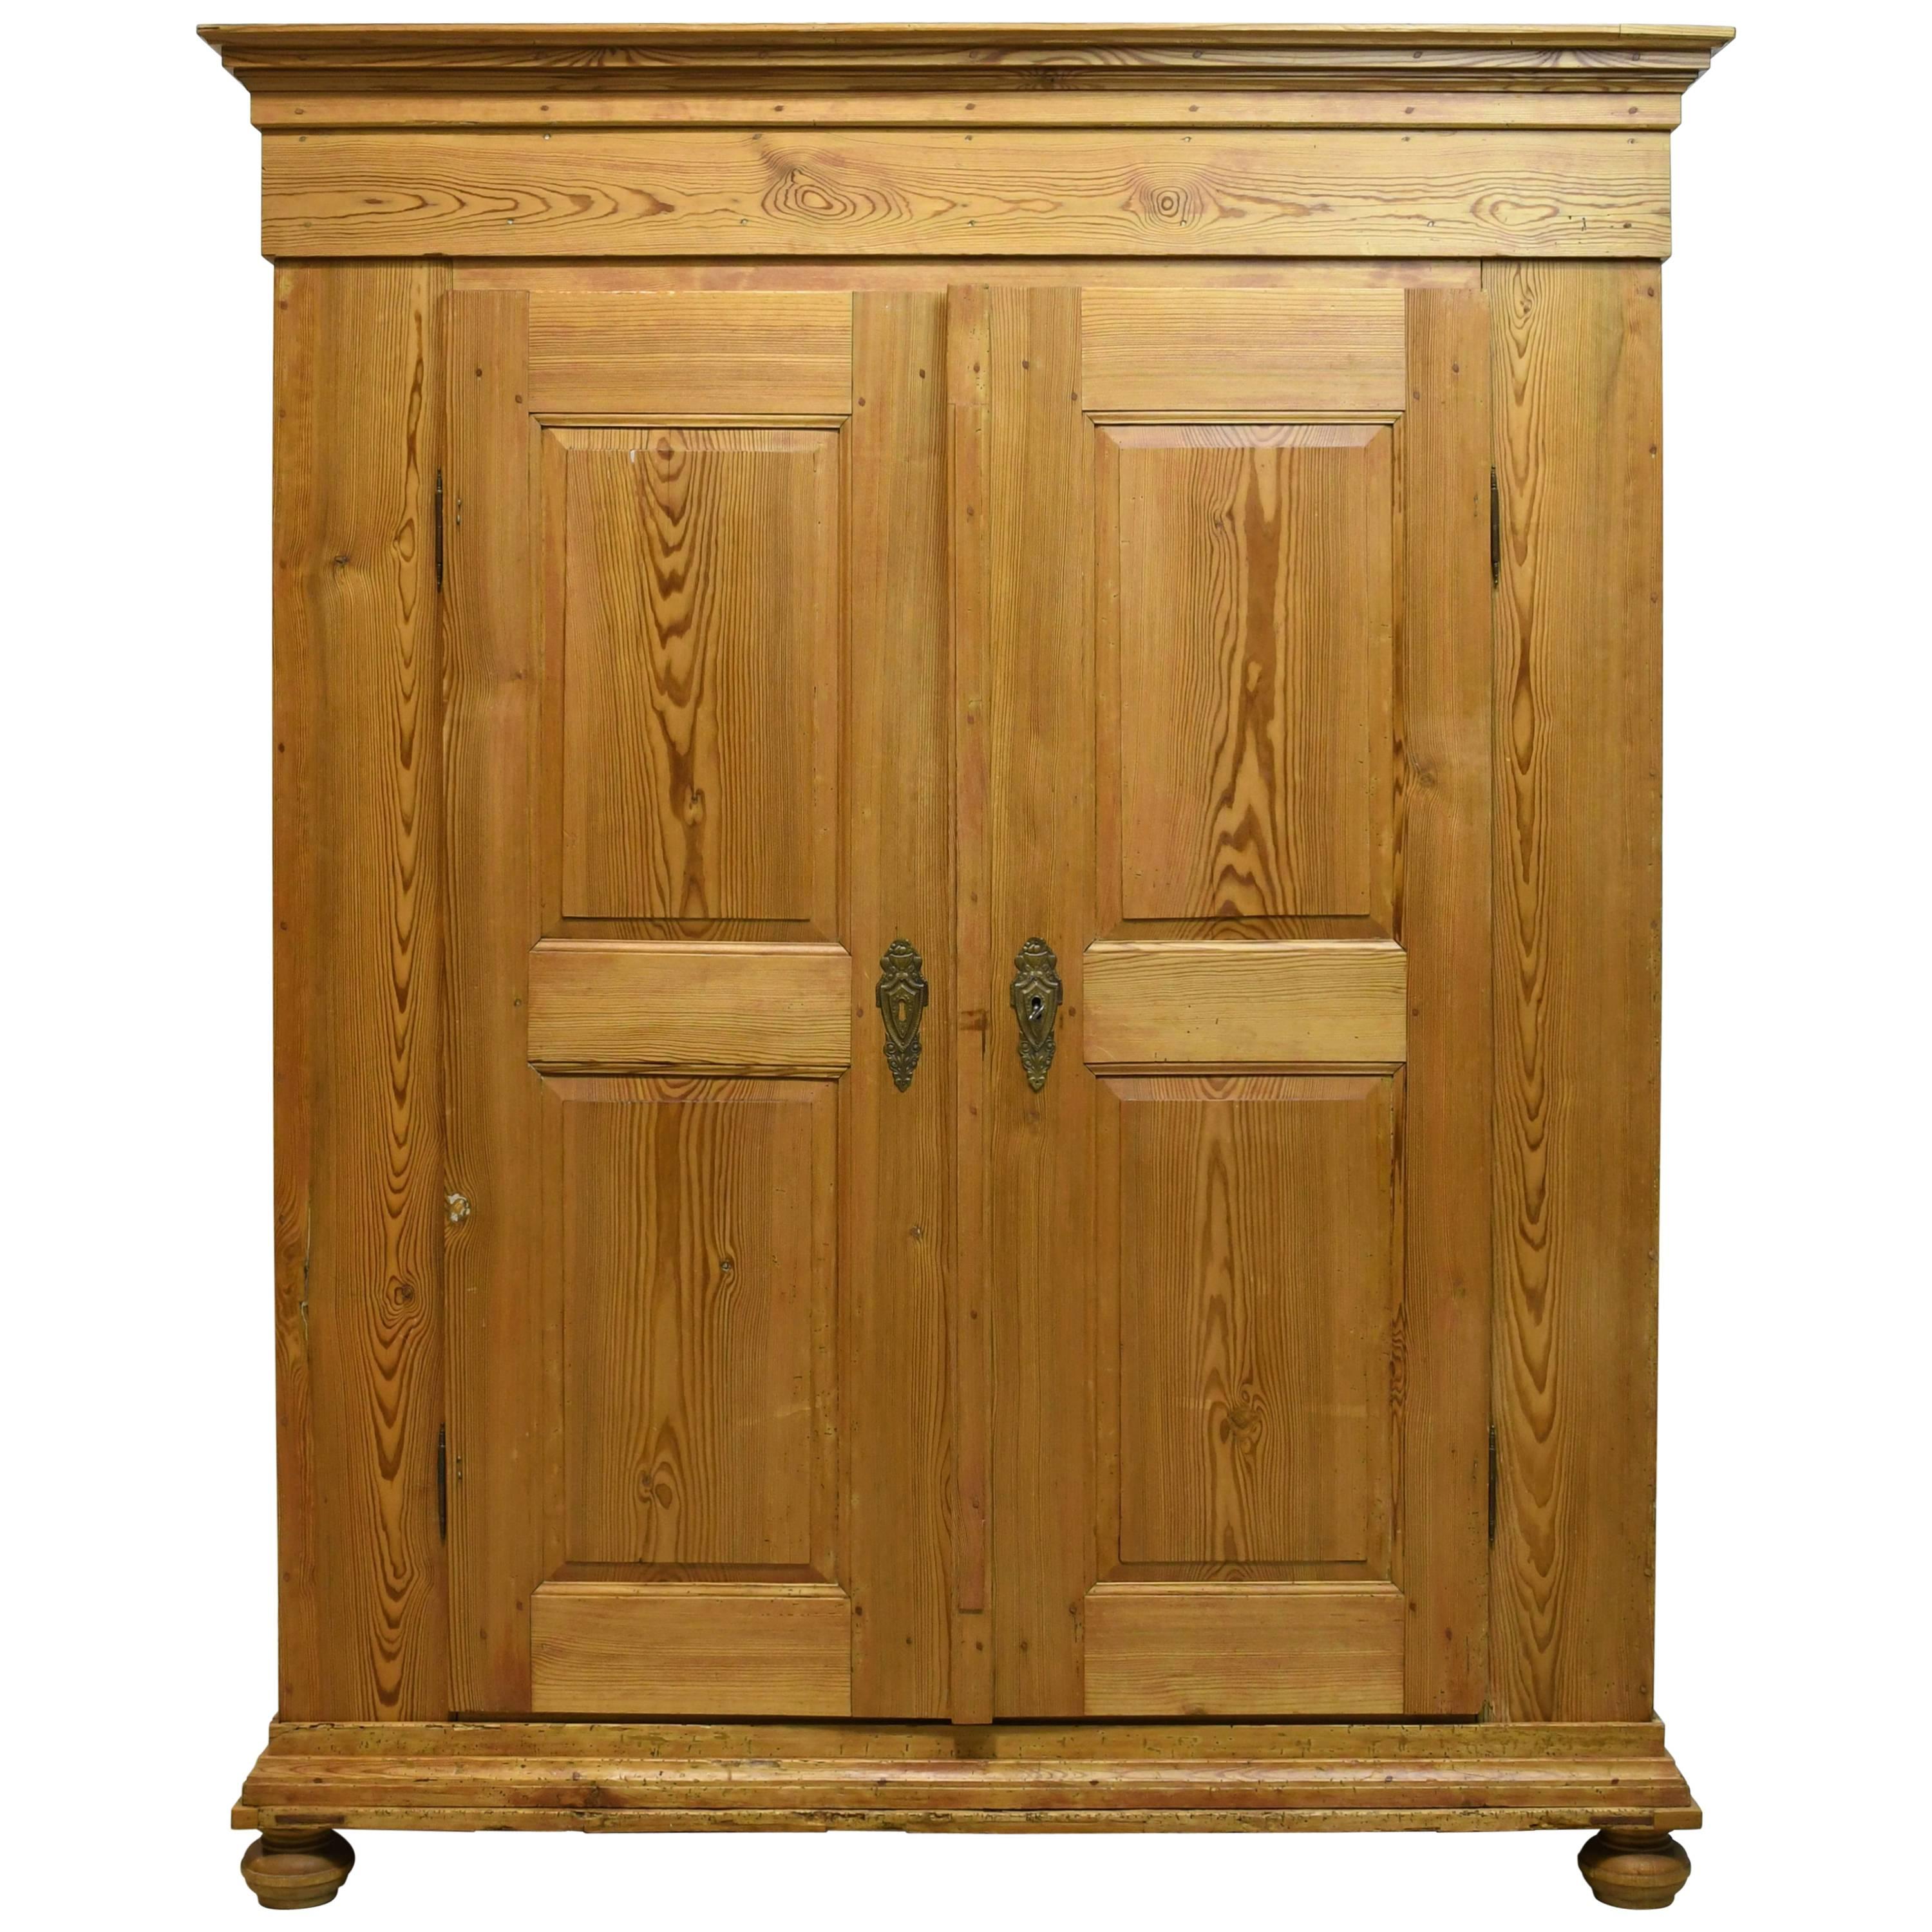 Pine or Kiefer Armoire from North Germany, circa 1800